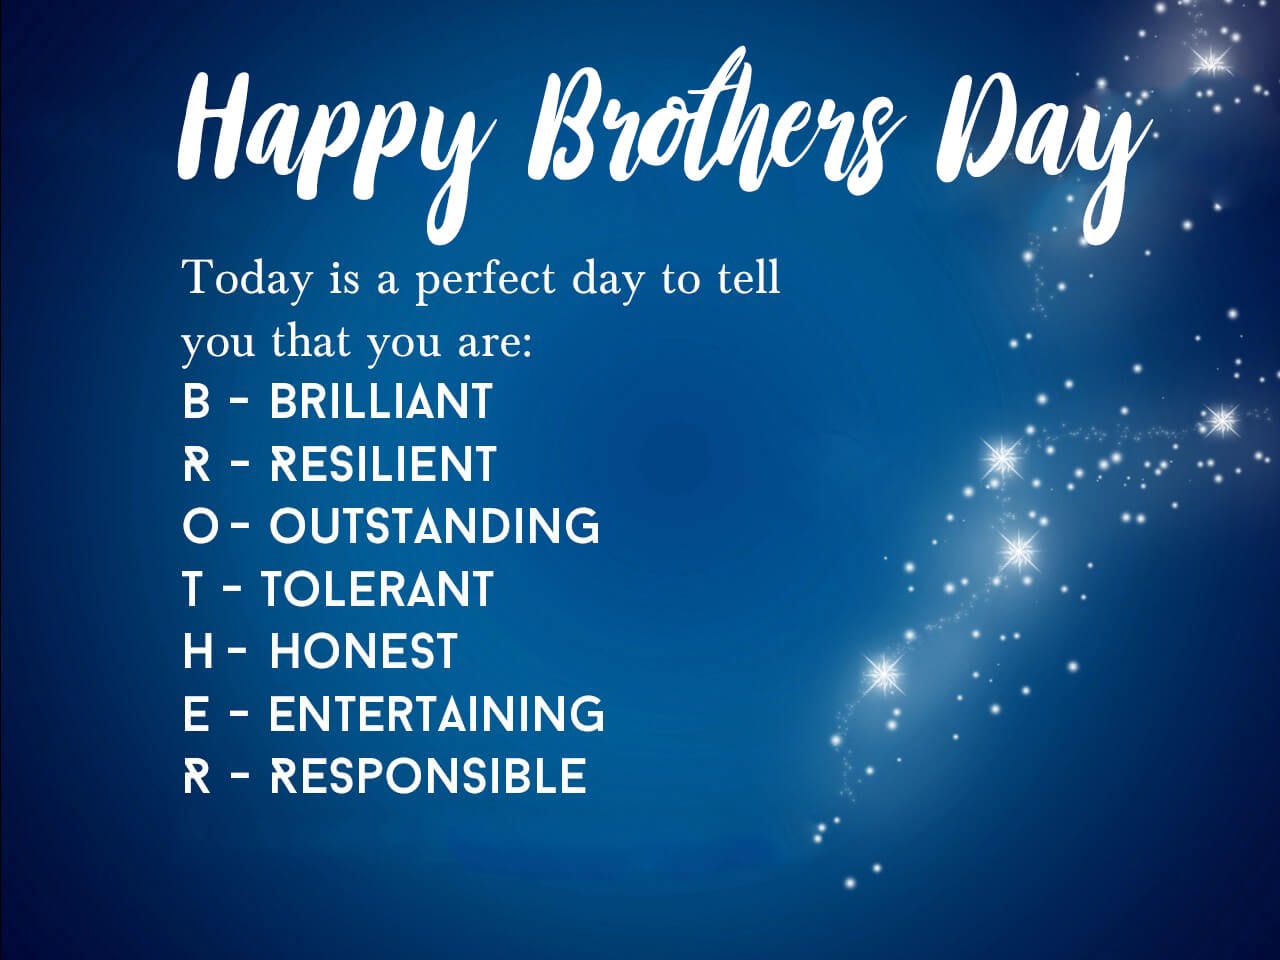 Happy Brother's Day Wallpapers - Wallpaper Cave